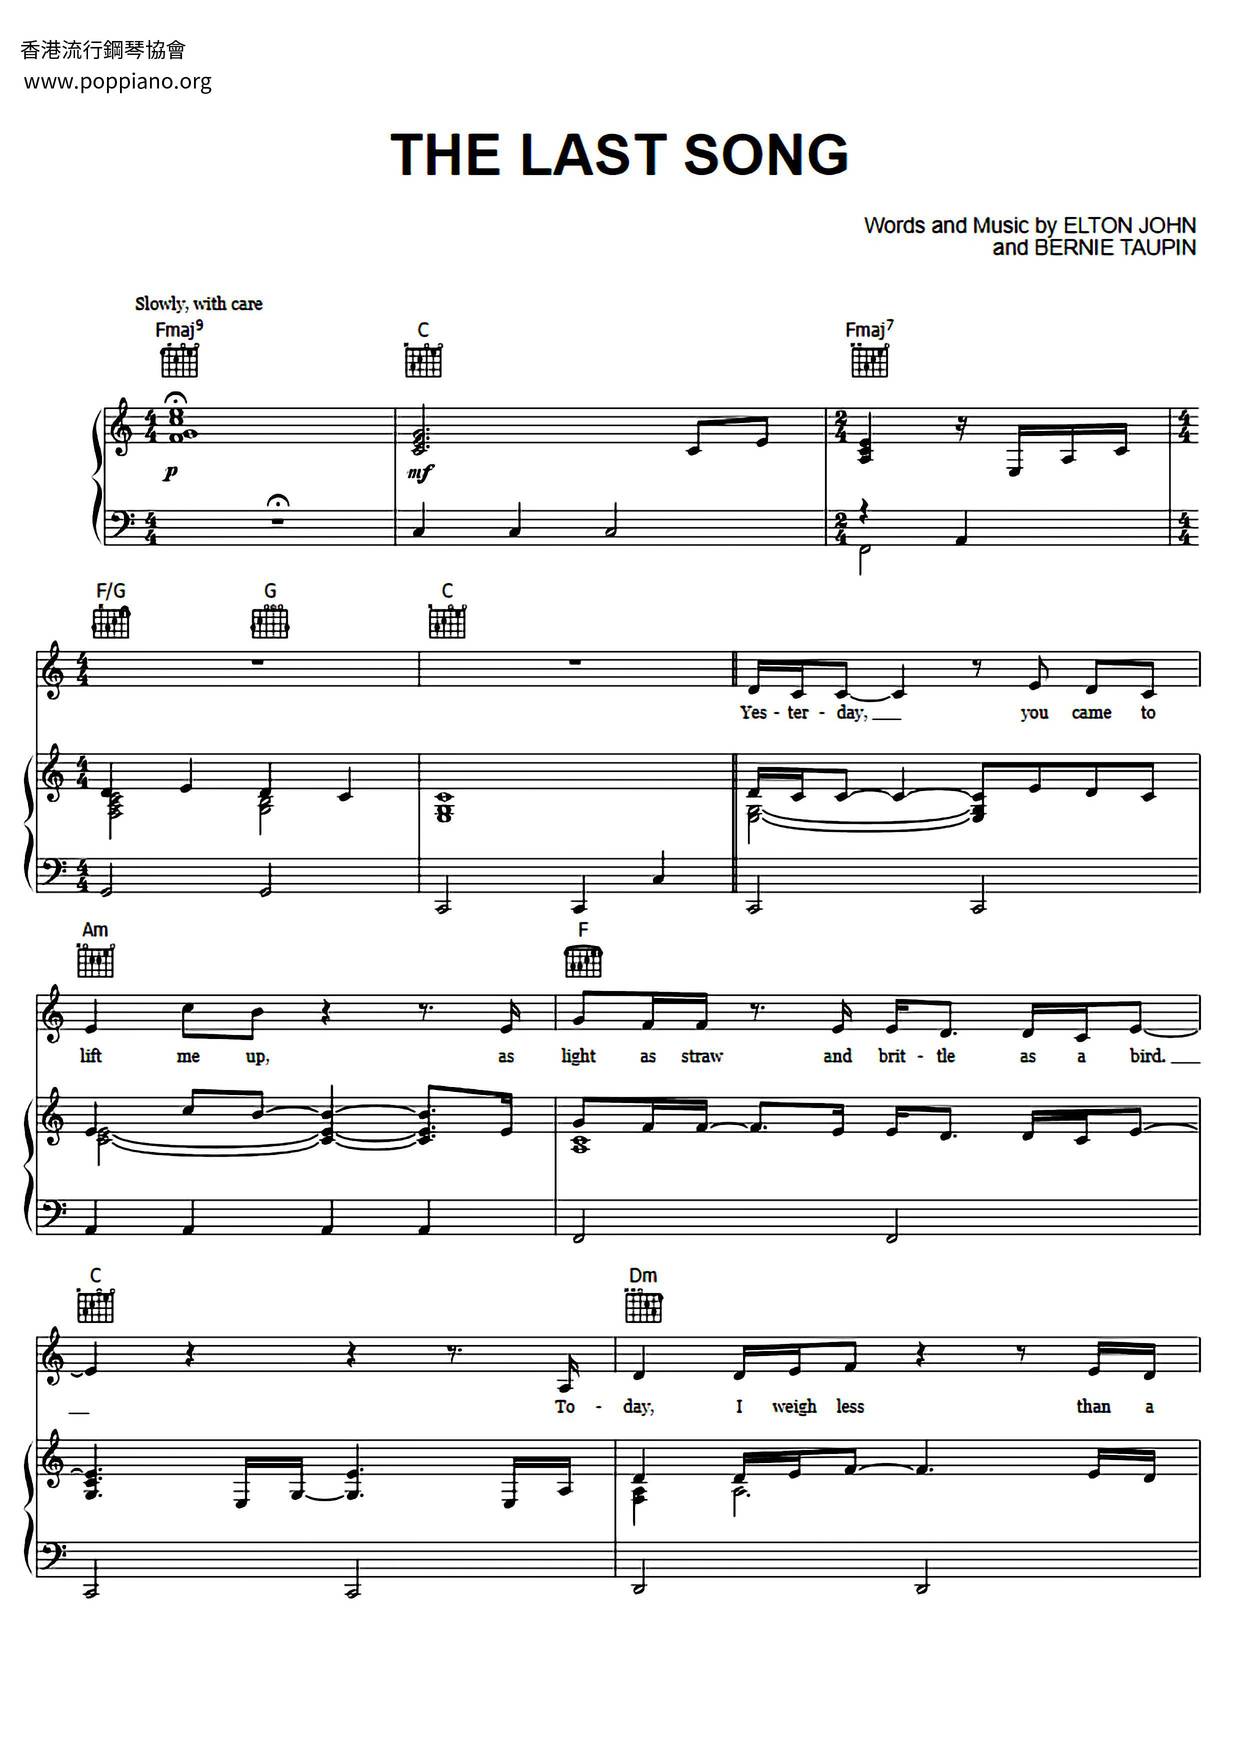 The Last Song Score